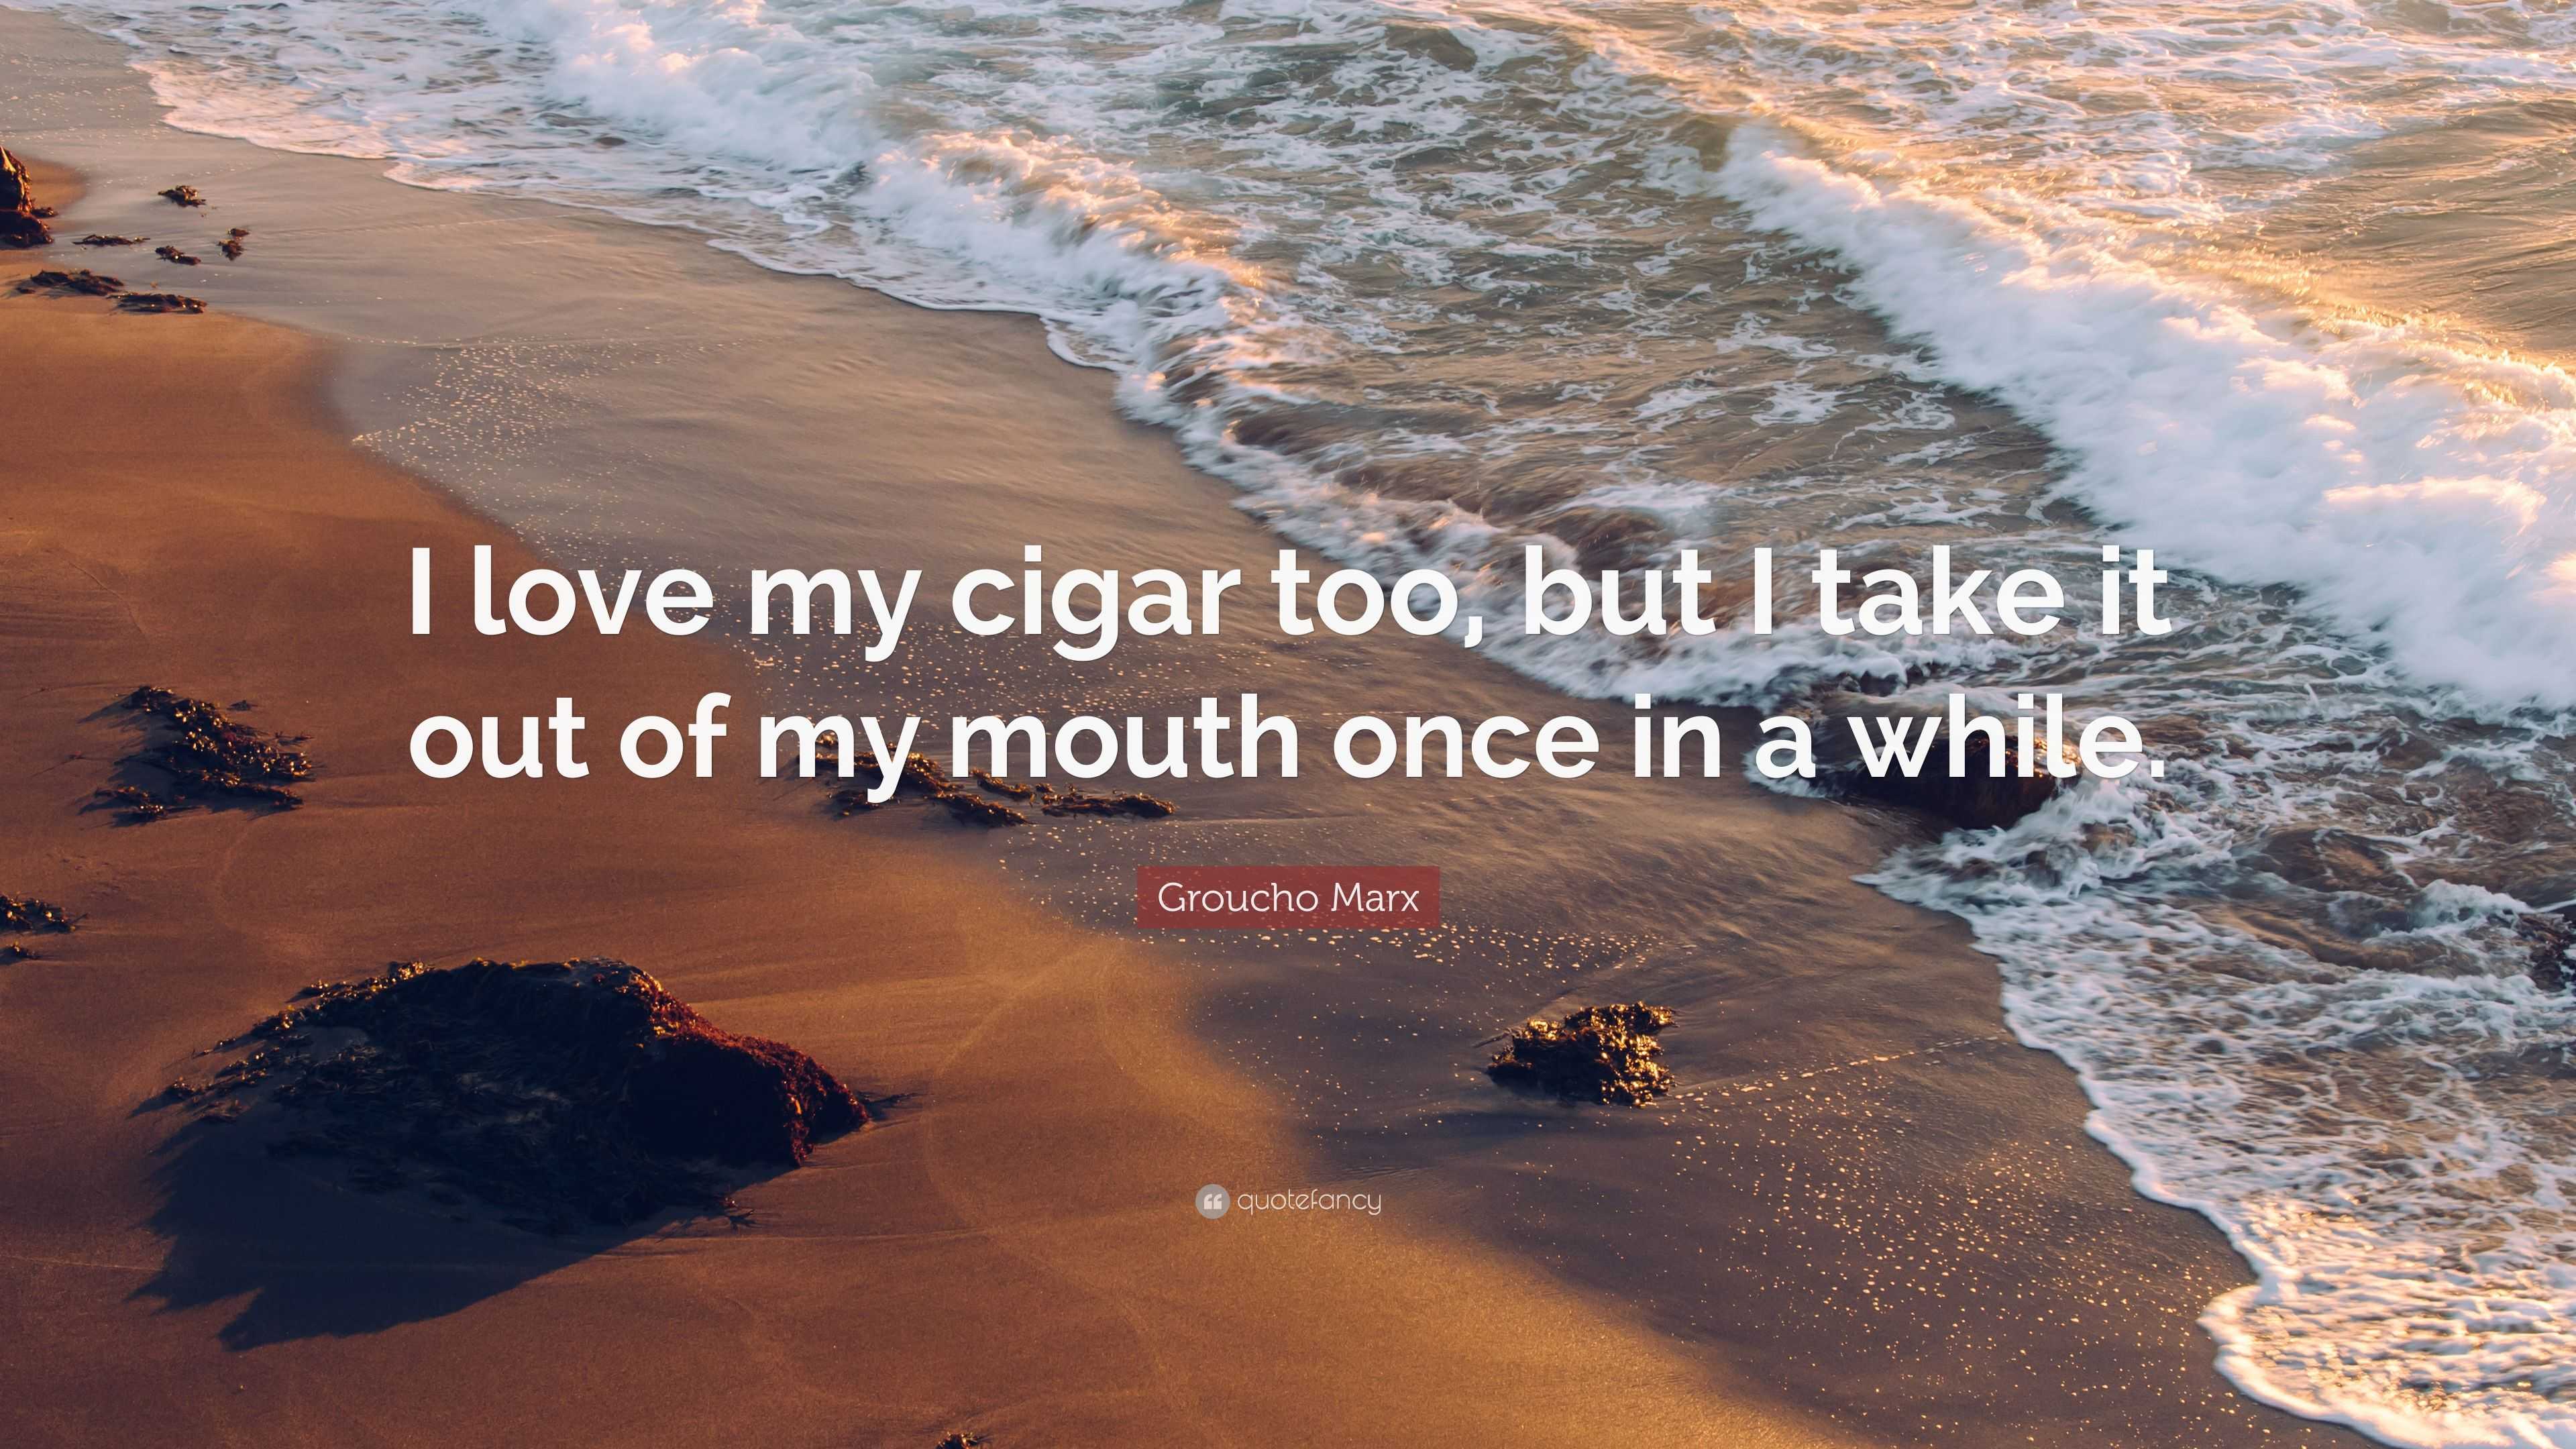 Groucho Marx Quote: "I love my cigar too, but I take it out of my mouth once in a while." (7 ...